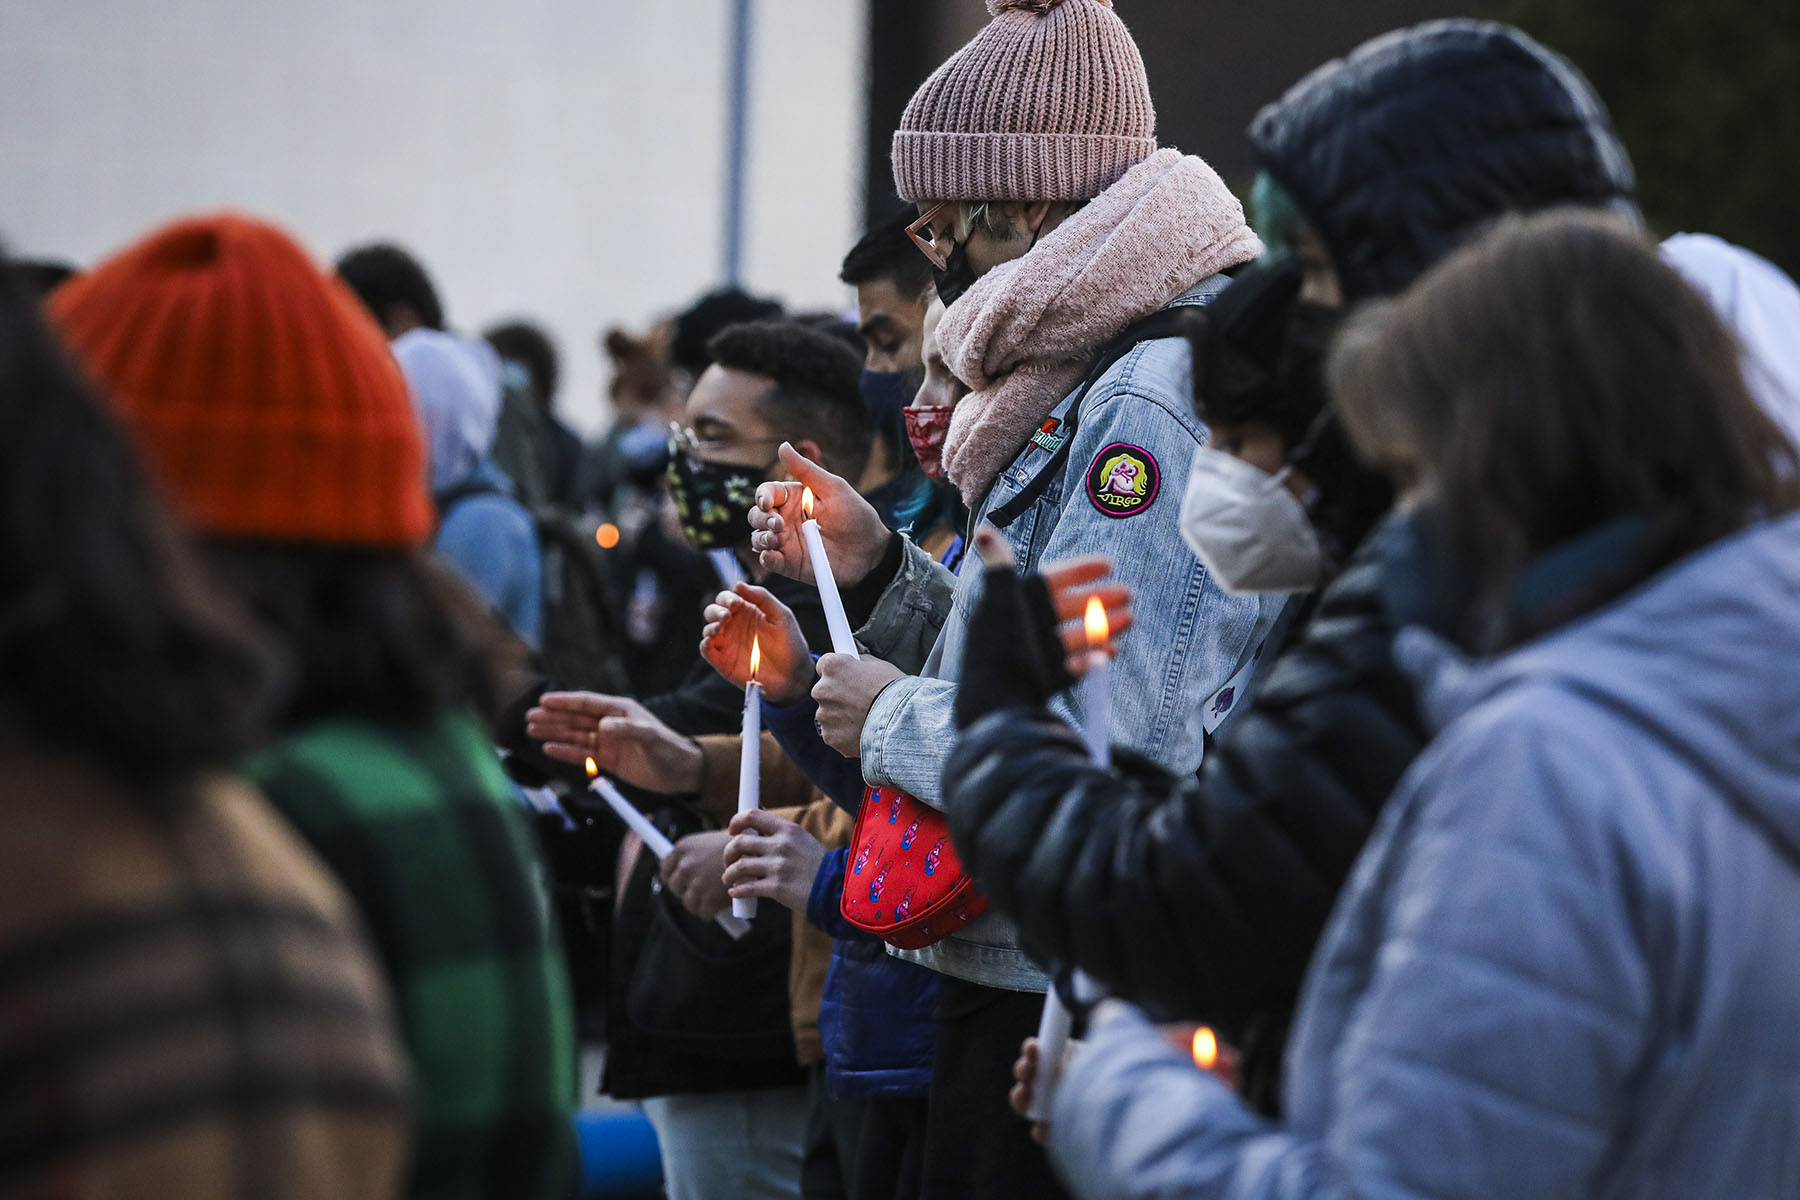 People hold candles as they attend the Transgender Day of Remembrance in Boston.